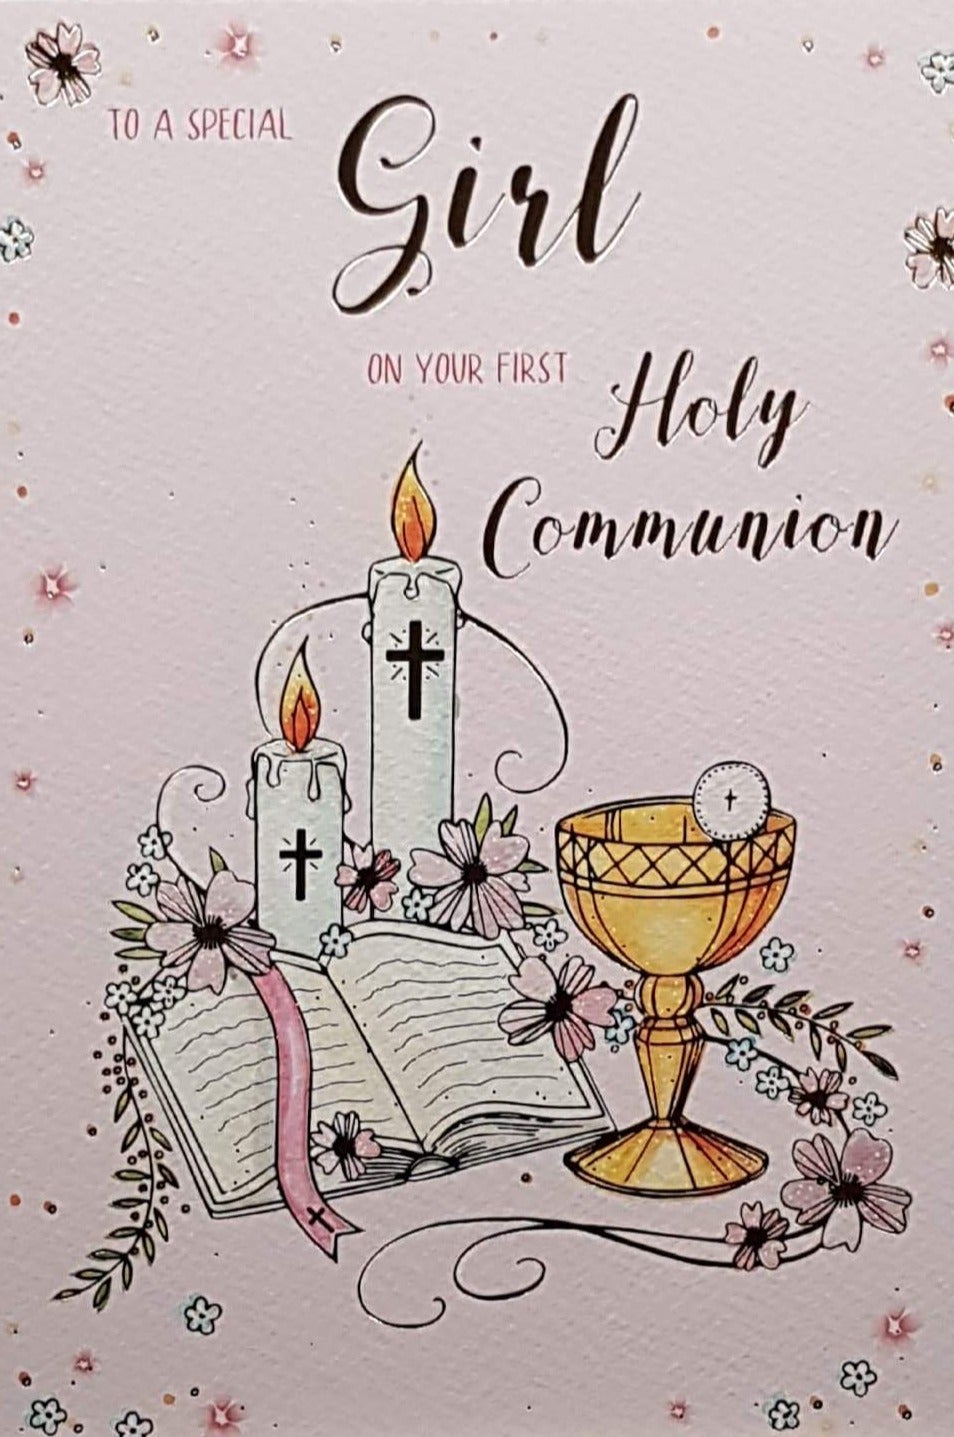 Communion Card - Girl - To A Special Girl & Chalice & Candles on Pink Background